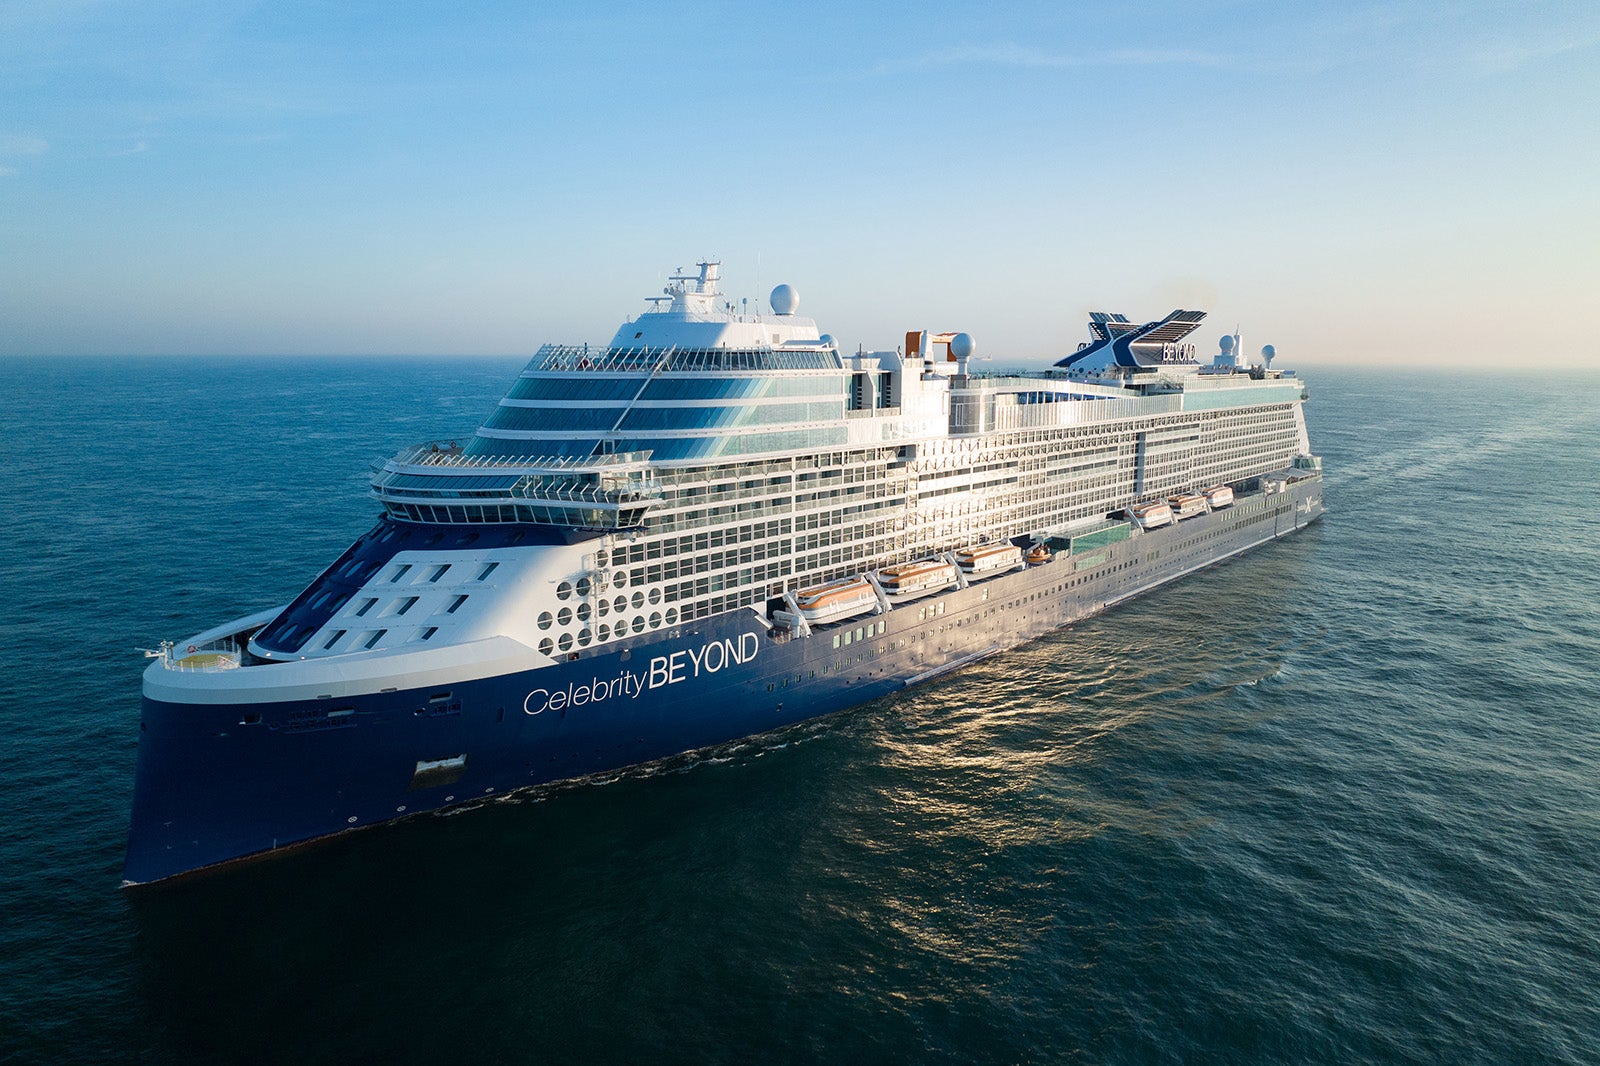 celebrity cruise ships ranked by size